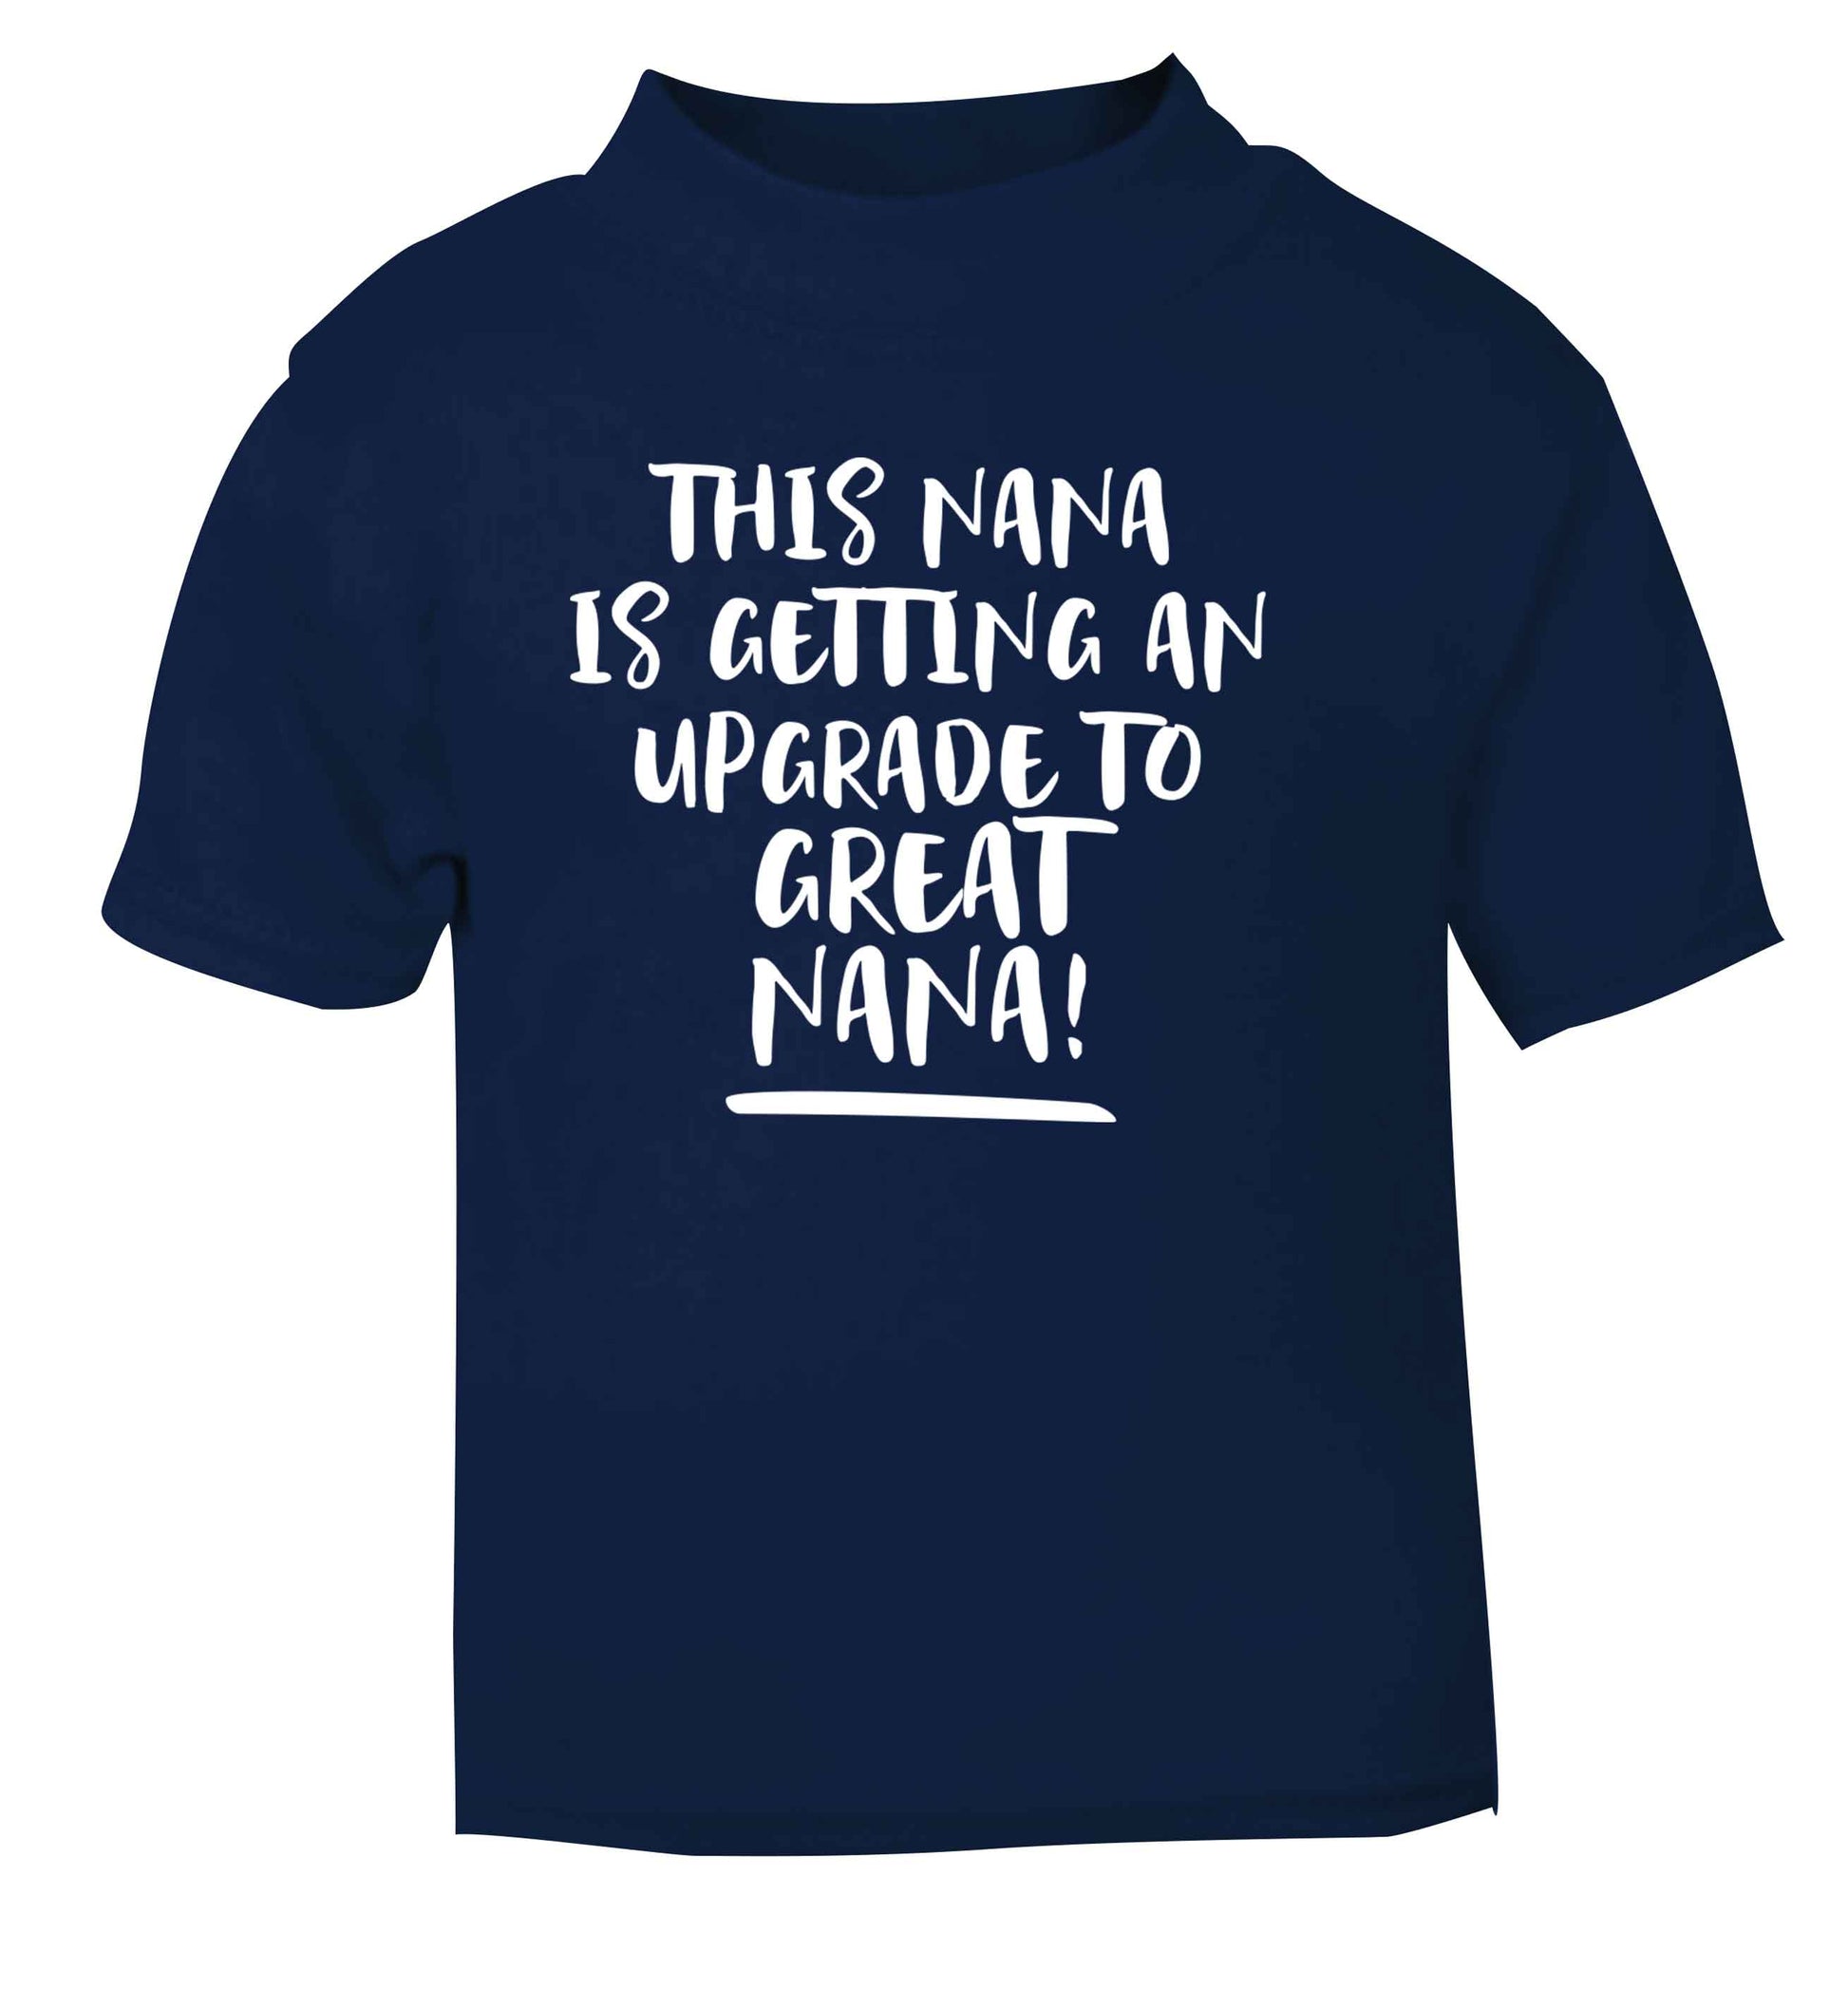 This nana is getting an upgrade to great nana! navy Baby Toddler Tshirt 2 Years